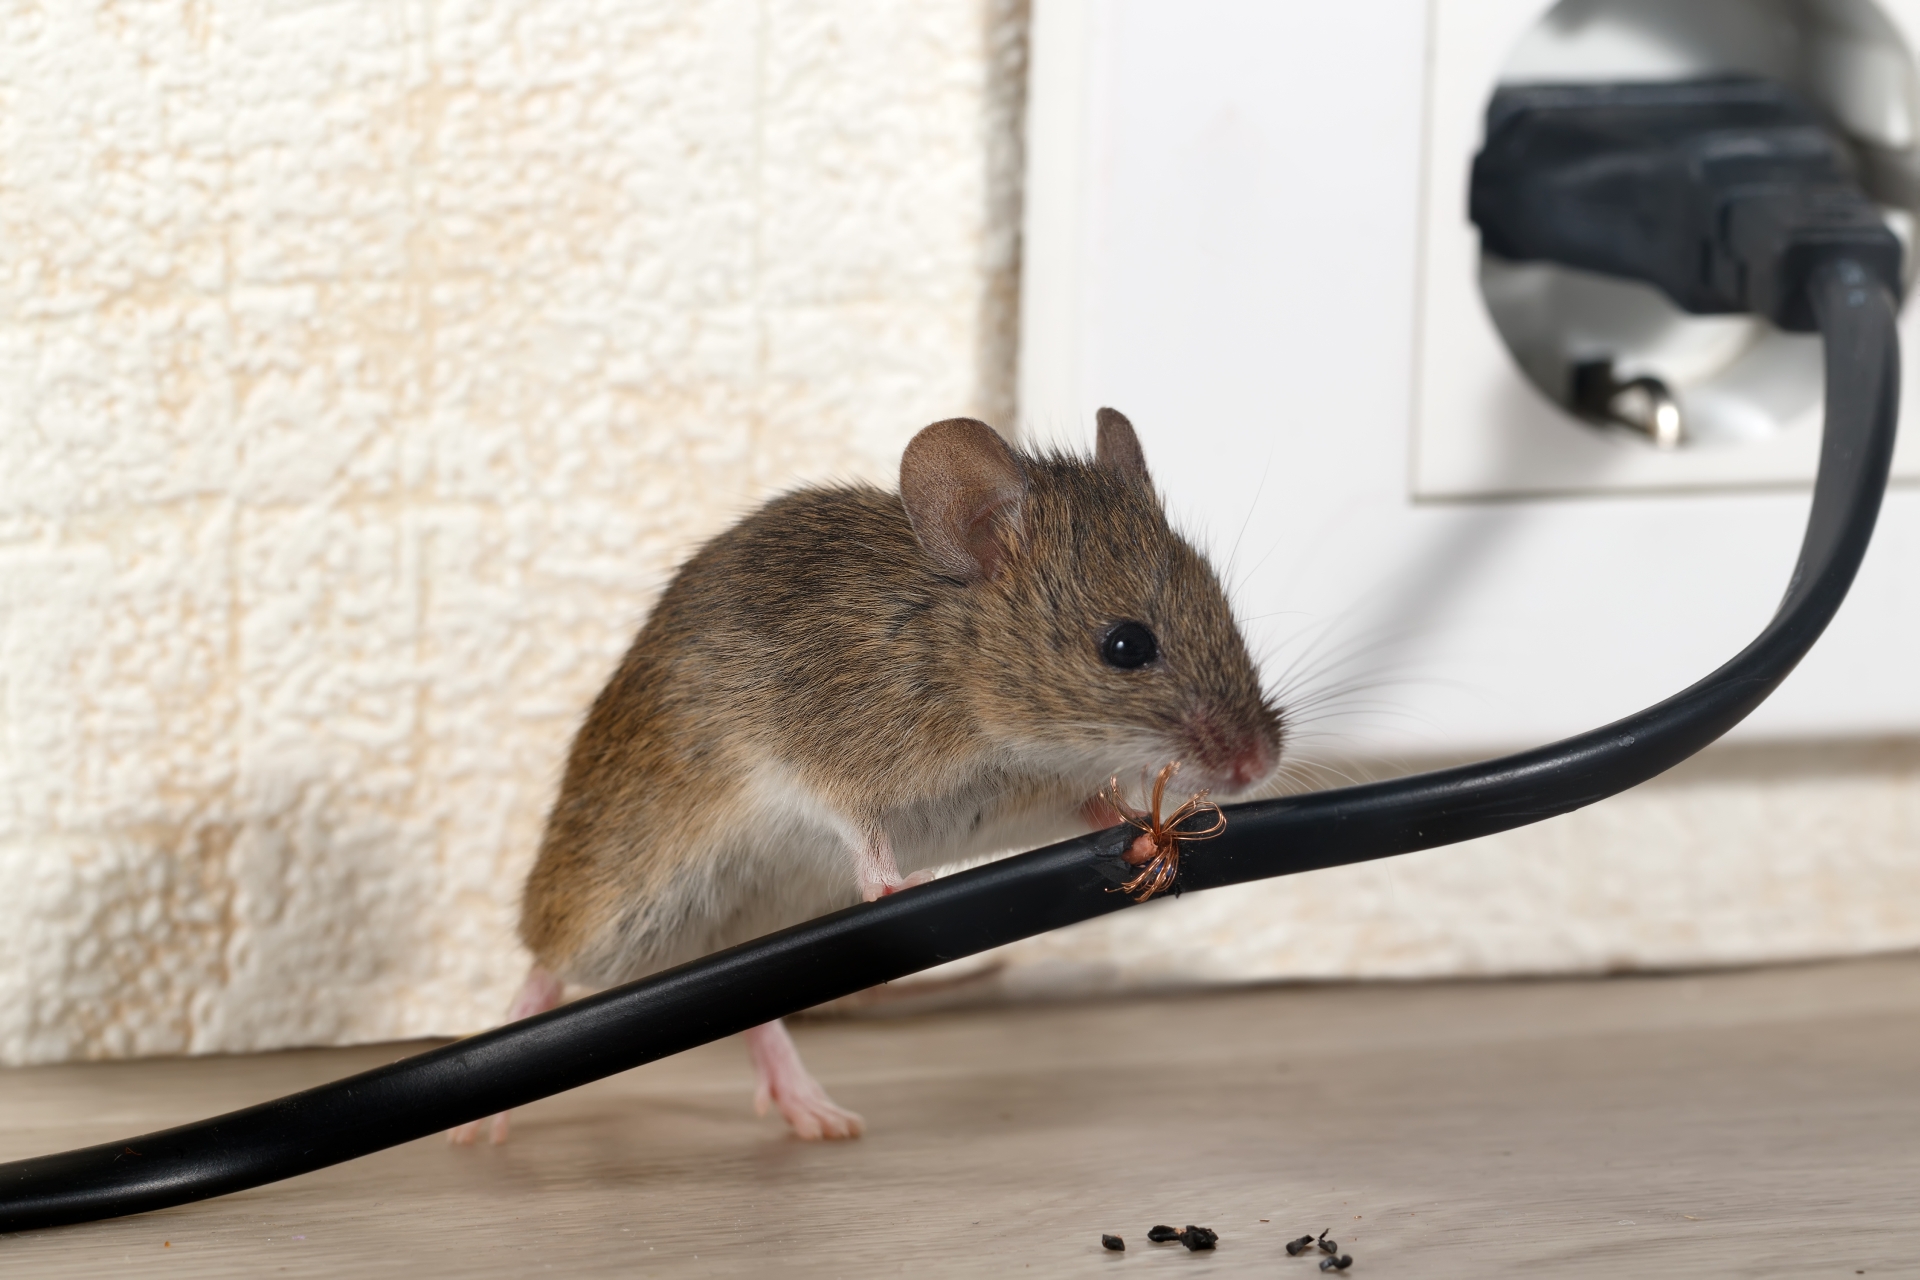 Mice Infestation, Pest Control in Tooting, SW17. Call Now 020 8166 9746